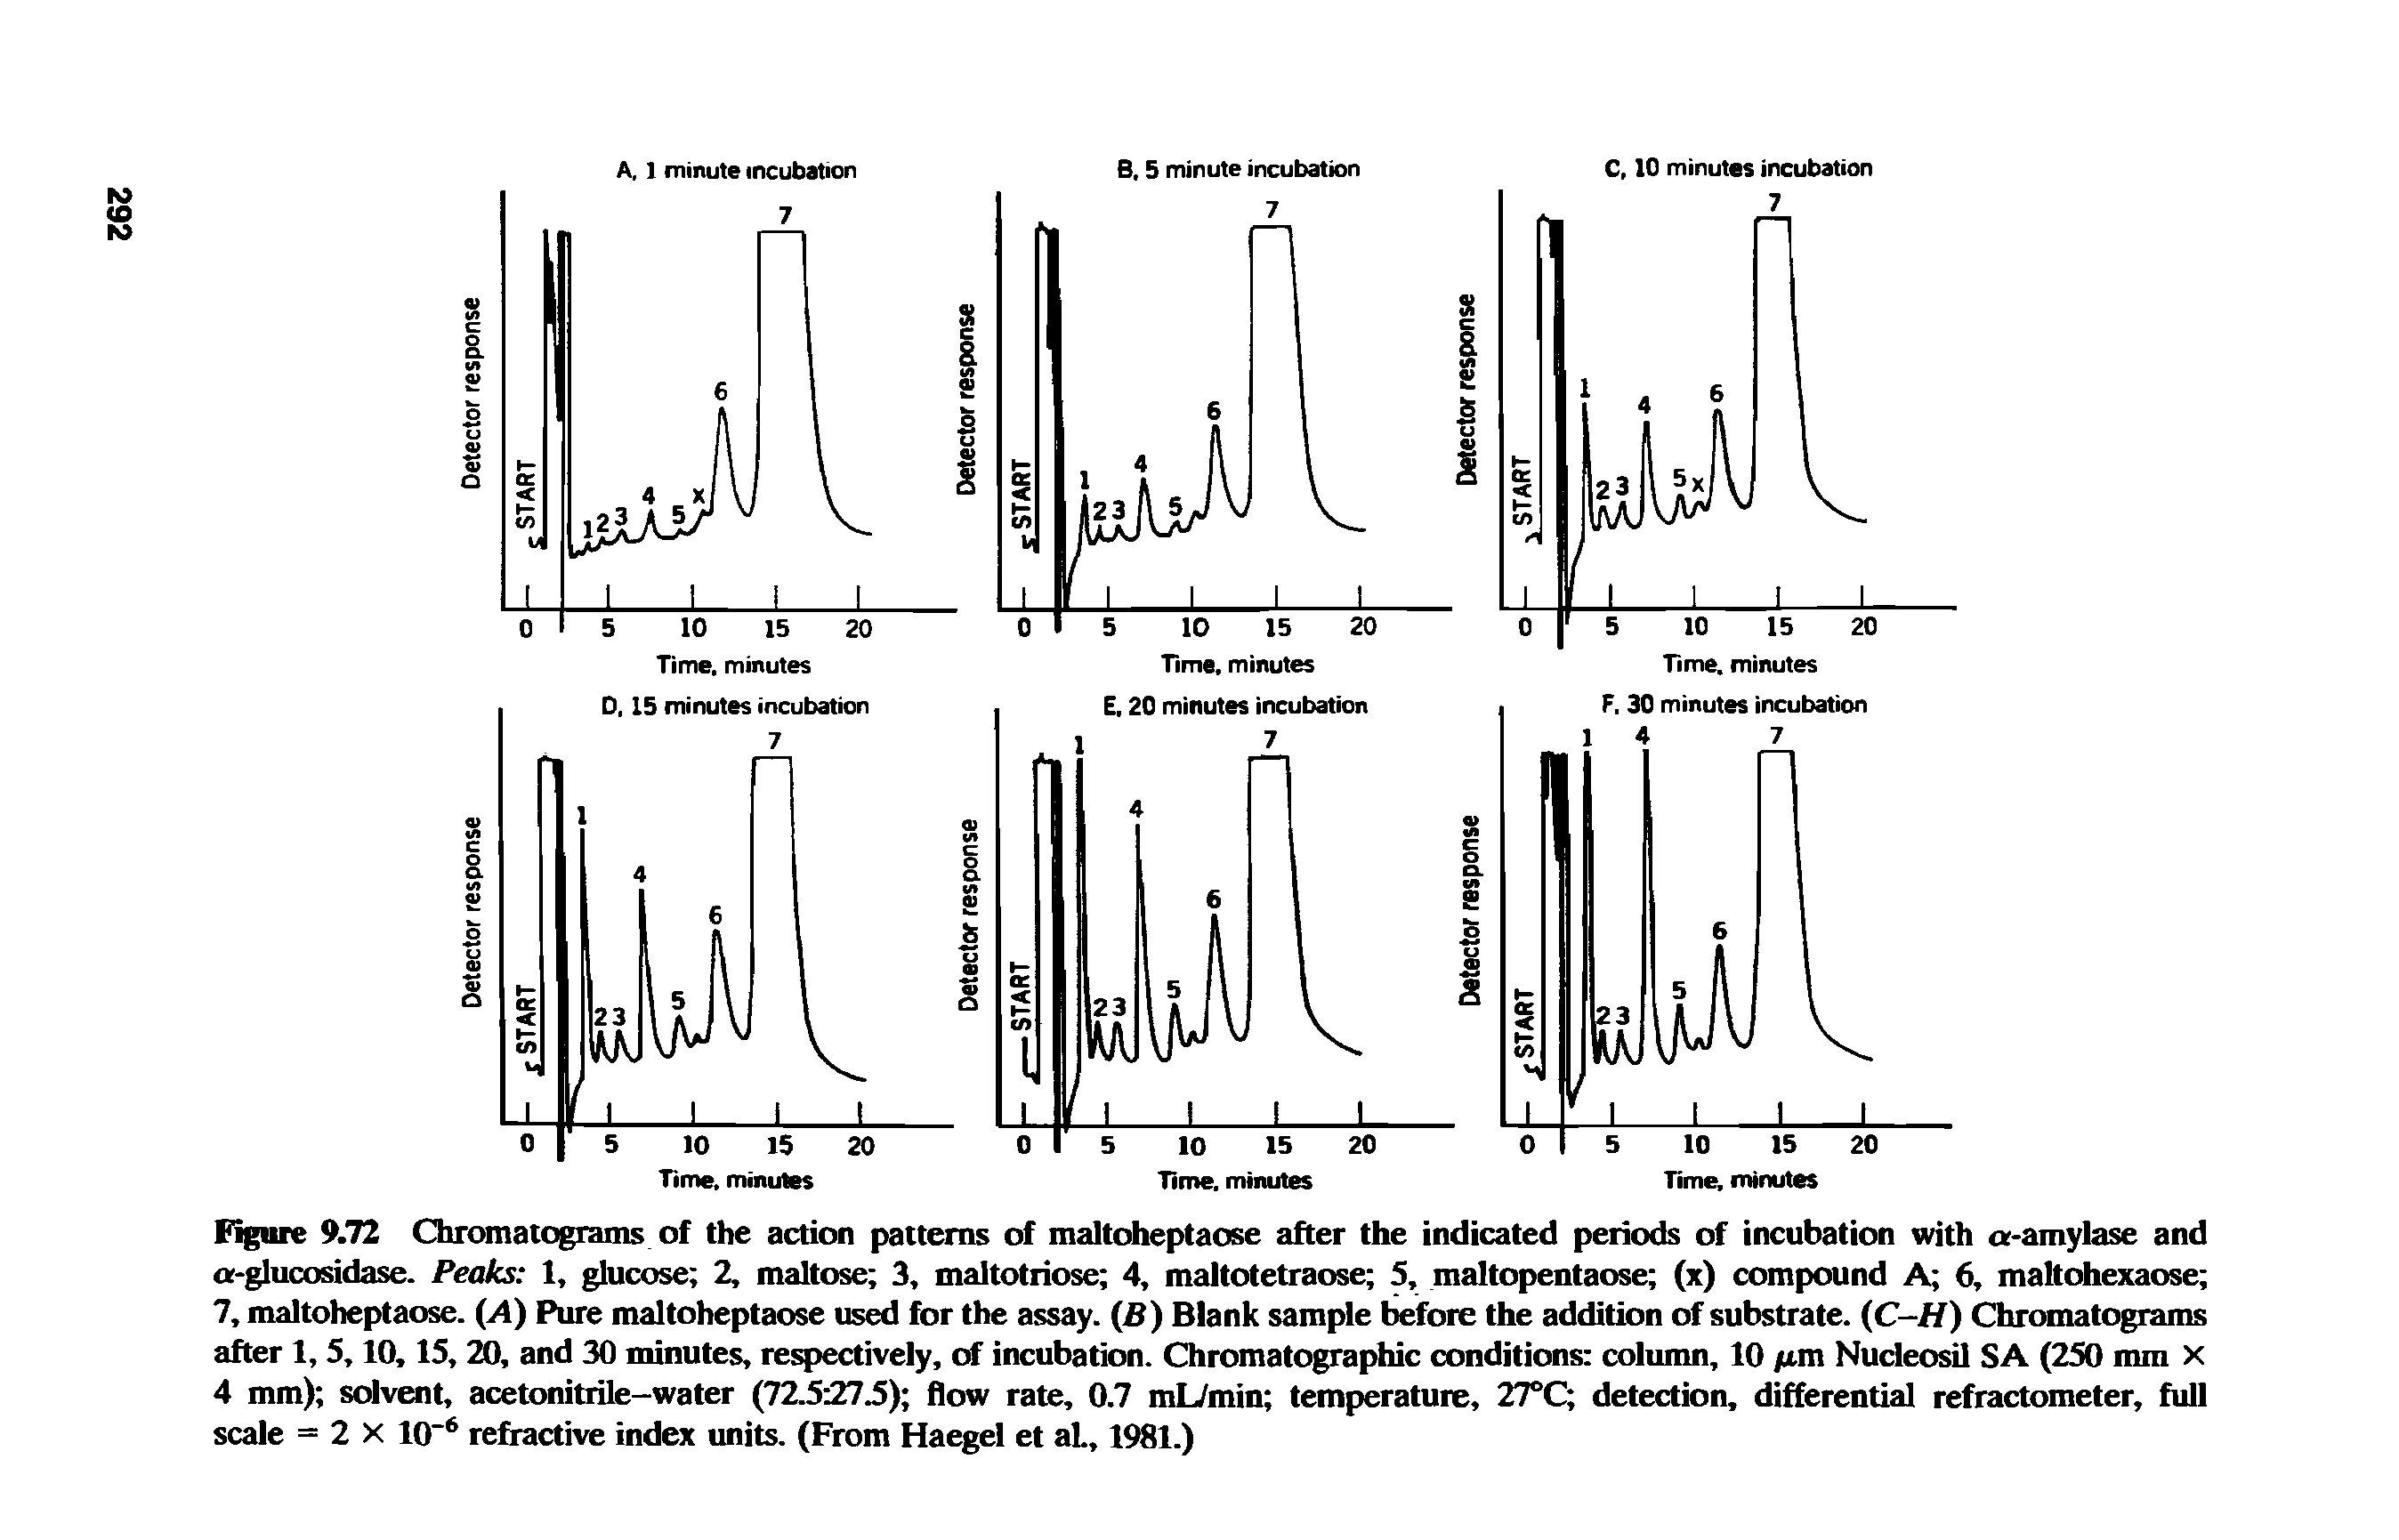 Figure 9.72 Chromatograms of the action patterns of maltoheptaose after the indicated periods of incubation with a-amylase and a-glucosidase. Peaks 1, glucose 2, maltose 3, maltotriose 4, maltotetraose 5, maltopentaose (x) compound A 6, maltohexaose 7, maltoheptaose. (A) Pure maltoheptaose used for the assay. (B) Blank sample before the addition of substrate. (C-H) Chromatograms after 1, 5, 10,15, 20, and 30 minutes, respectively, of incubation. Chromatographic conditions column, 10 jum Nucleosil SA (250 mm X 4 mm) solvent, acetonitrile-water (72.527.5) flow rate, 0.7 mL/min temperature, 27°C detection, differential refractometer, full scale = 2 X 10-6 refractive index units. (From Haegel et aL, 1981.)...